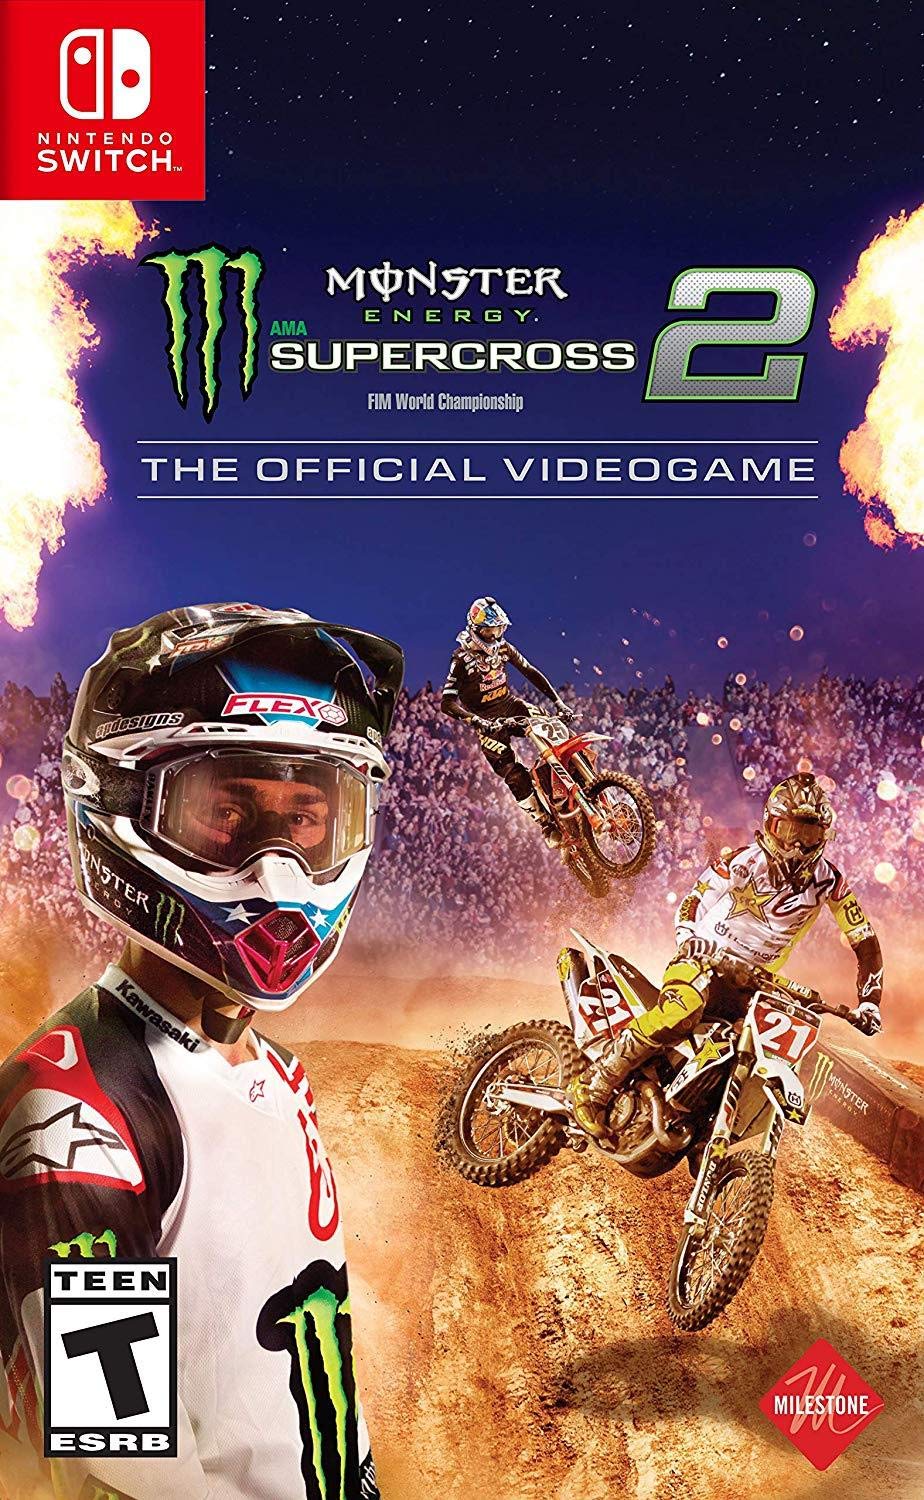 Monster Energy Supercross: The Official Videogame 2 (Nintendo Switch) $15.29 + Free Shipping w/ Prime or on orders over $25